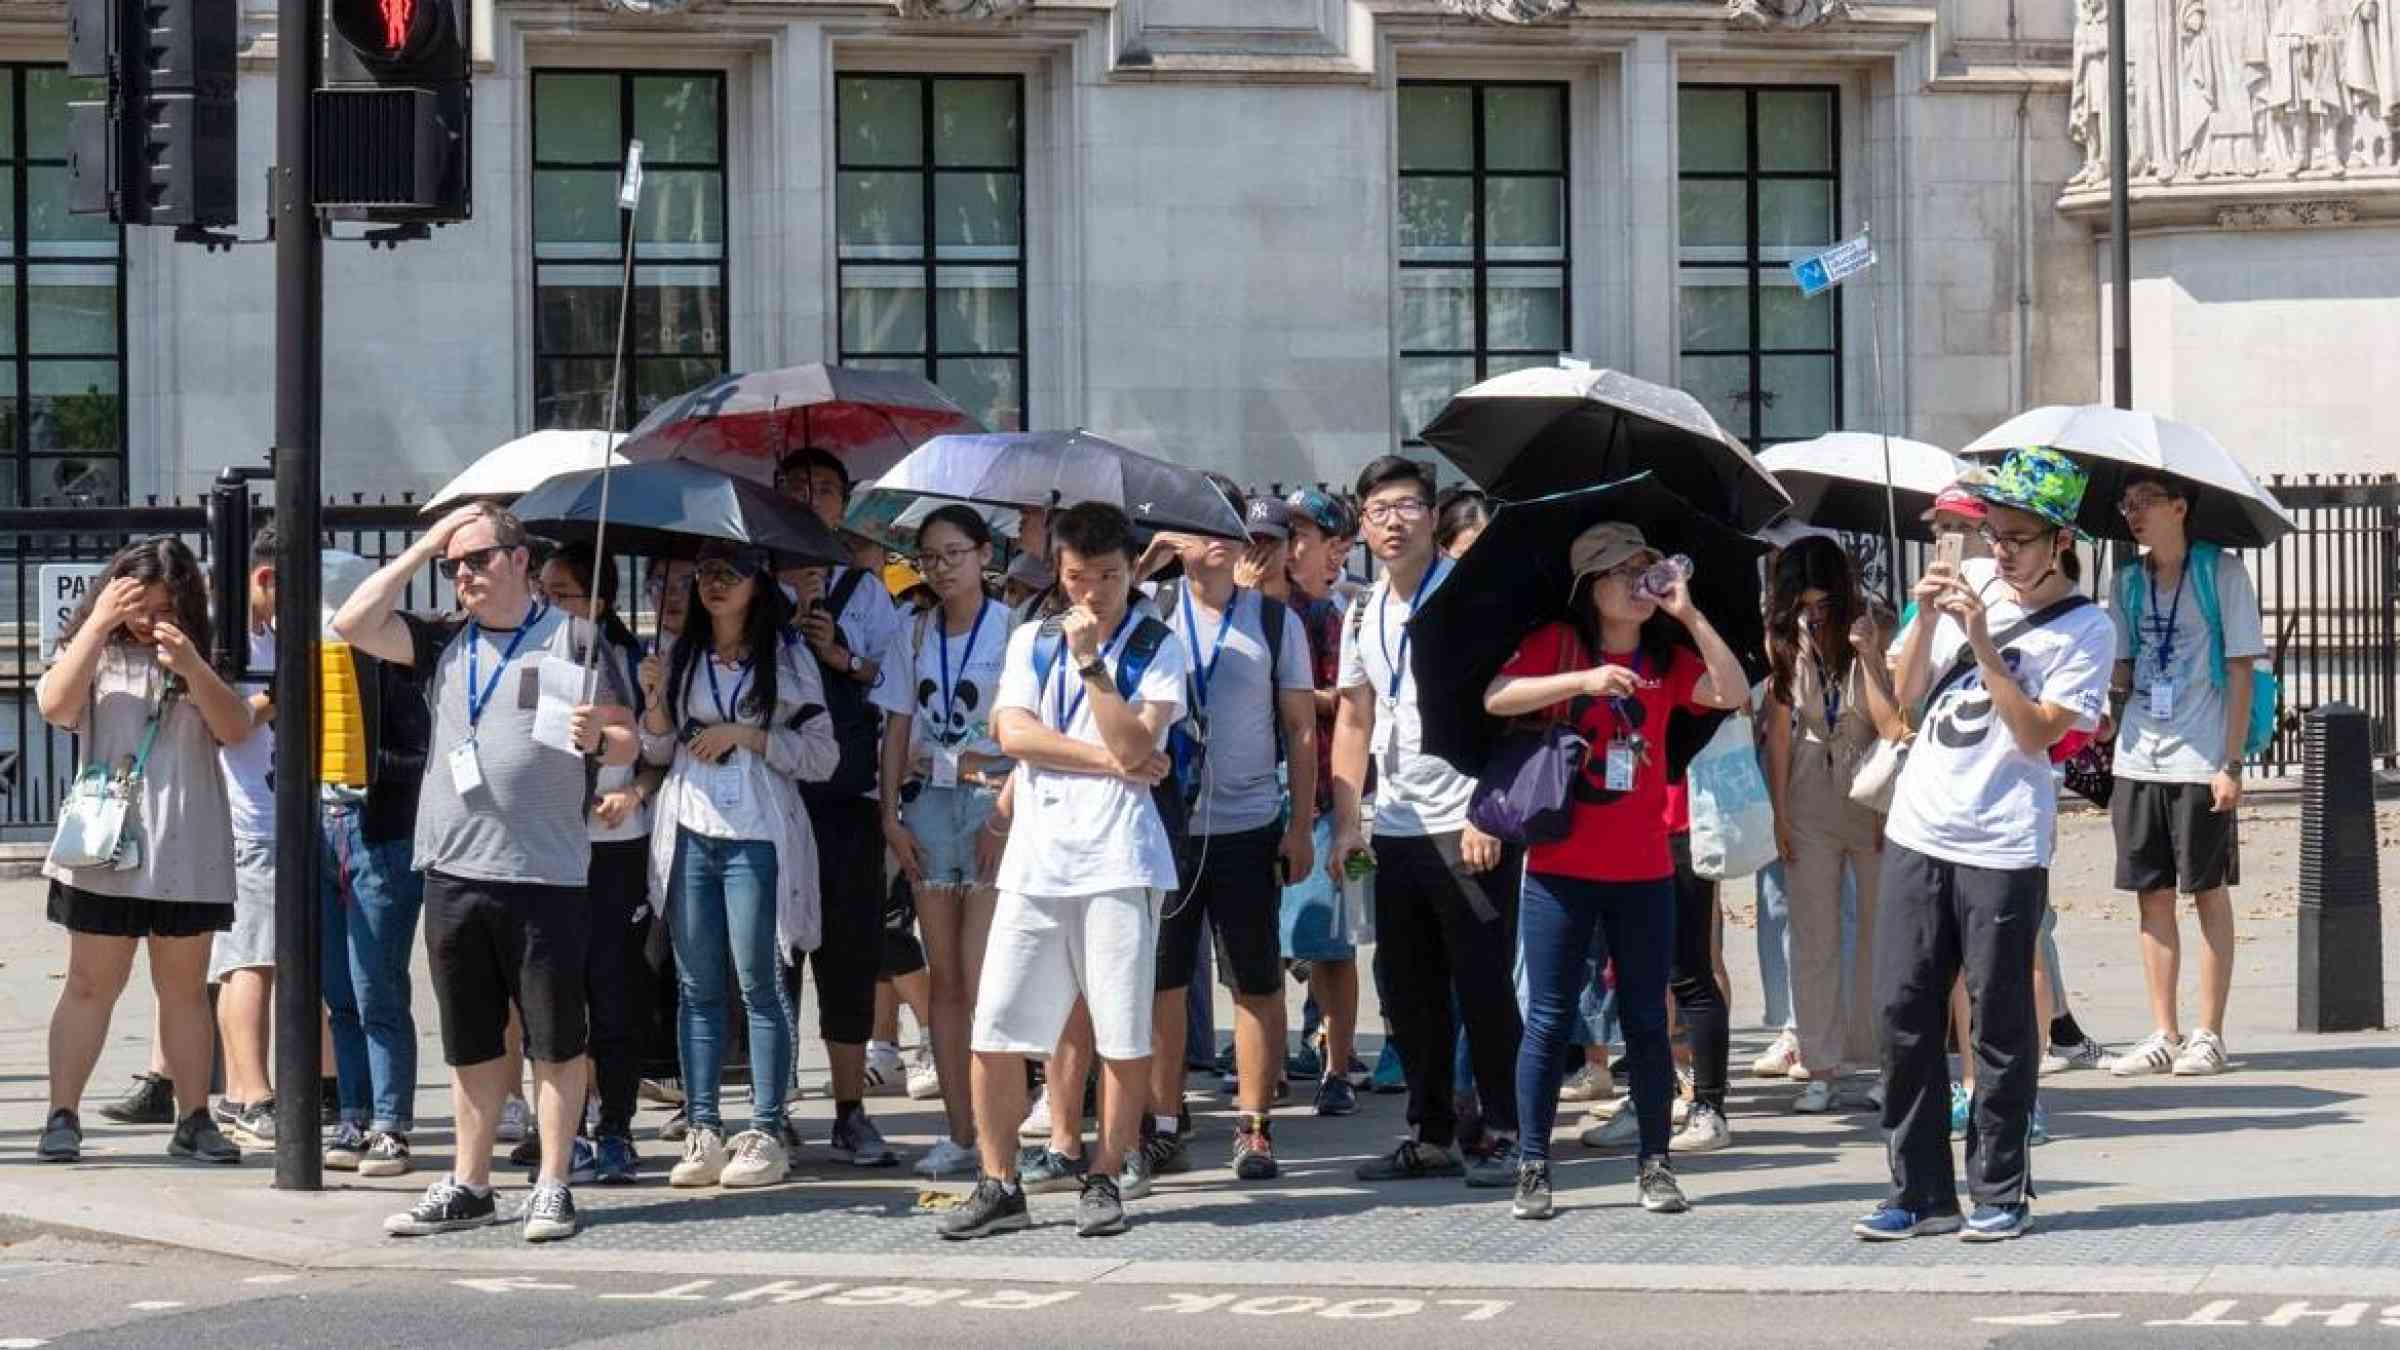 Tourists seek shade with umbrellas during a hot day in London